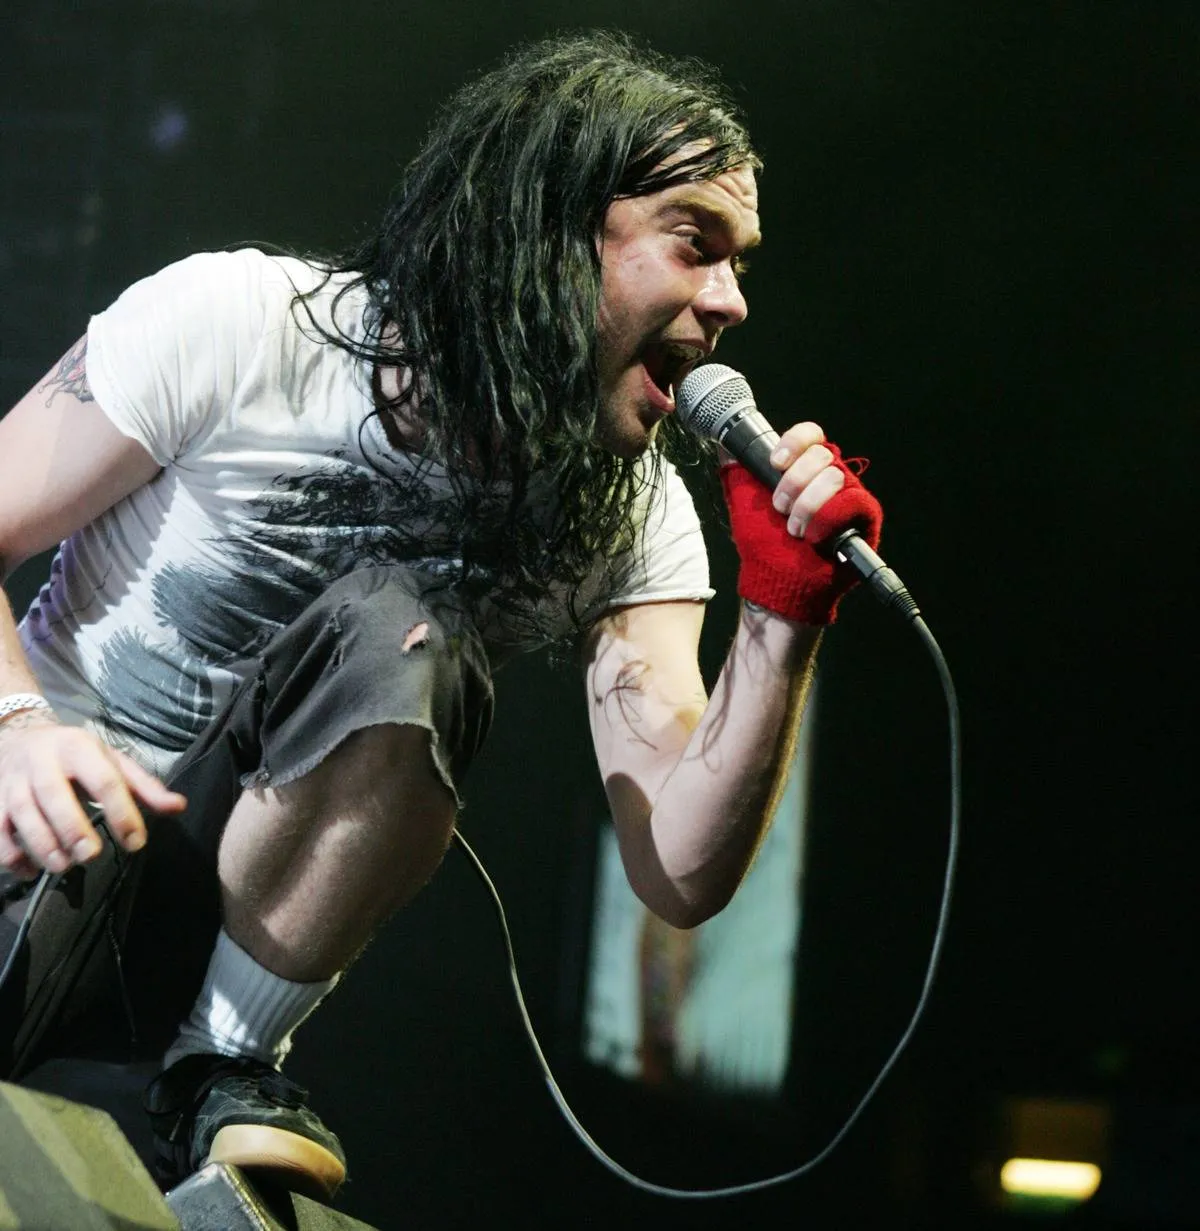 Bert McCracken sings onstage with his band, The Used.